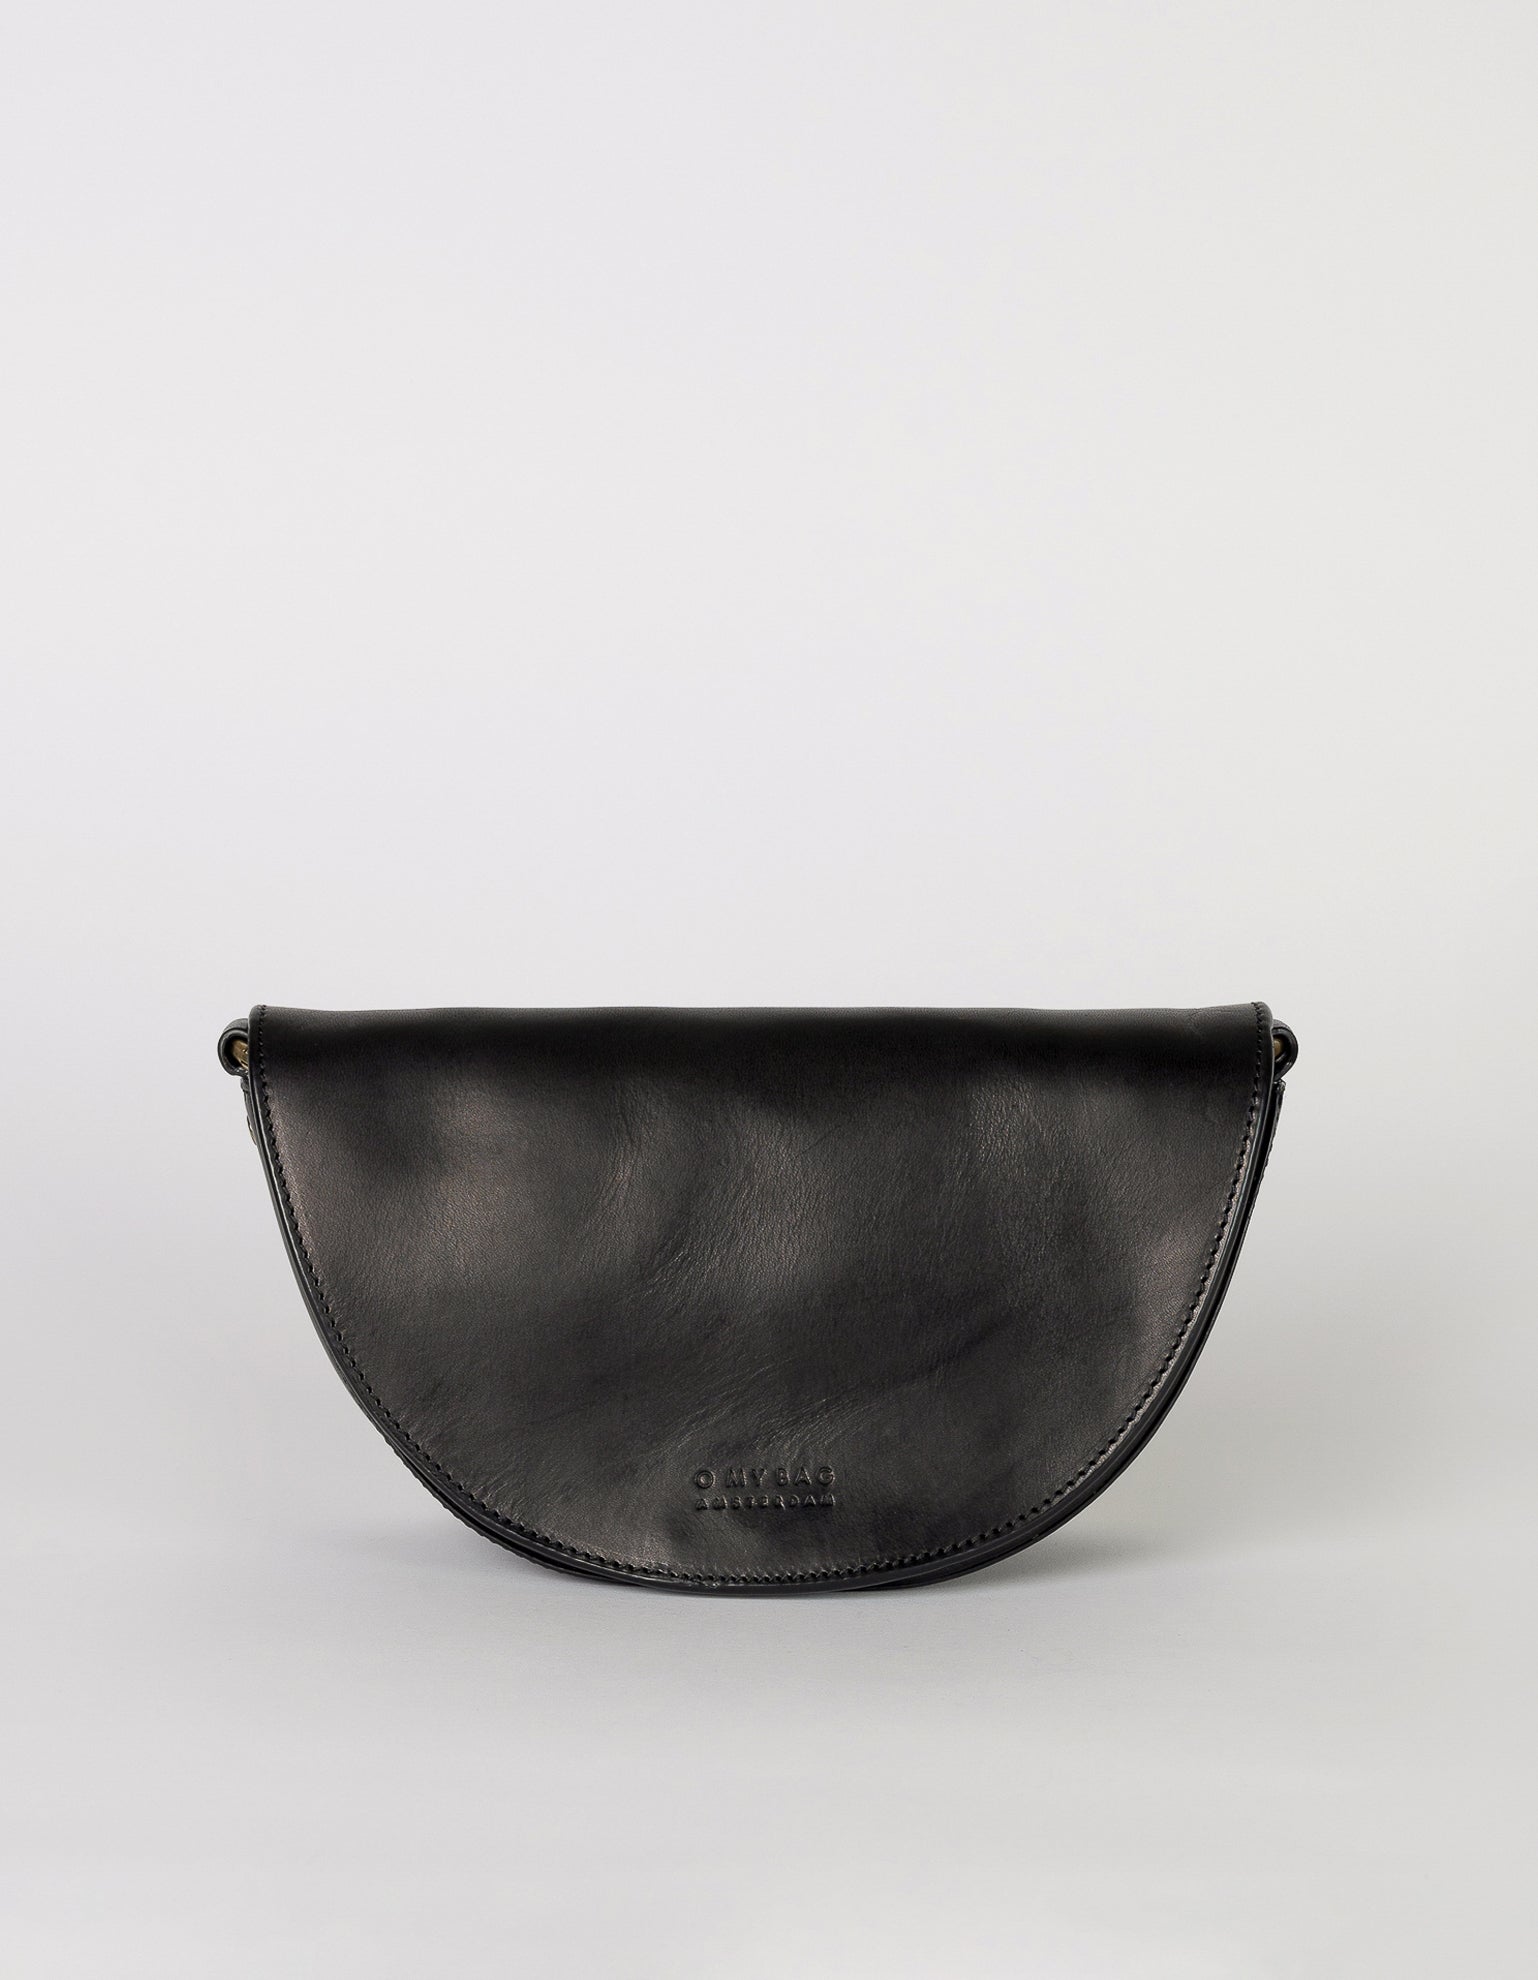 Laura Bag Black Classic Leather. Round moon shape crossbody bag without strap. Front product image.